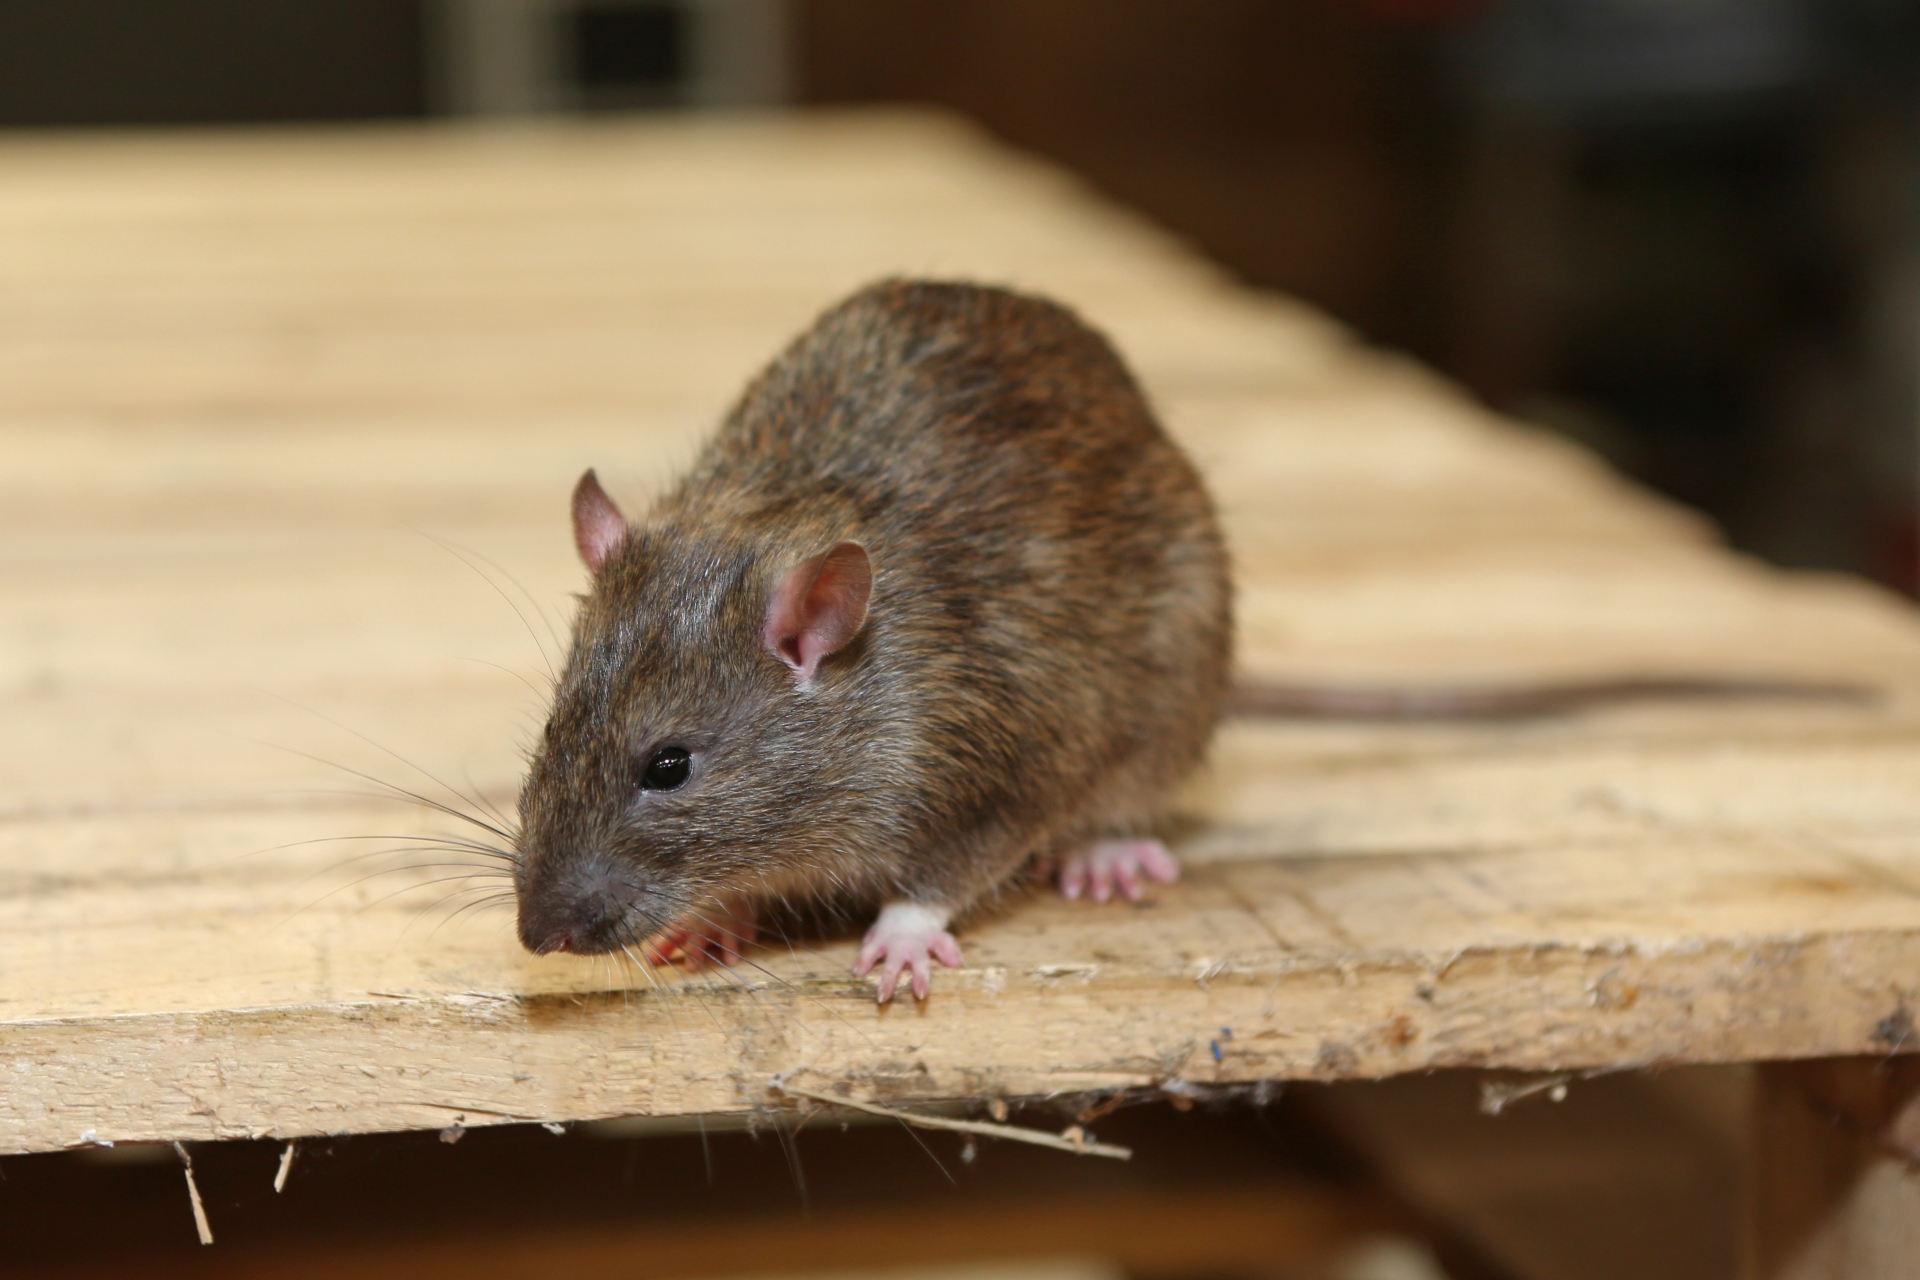 Rat Infestation, Pest Control in Earlsfield, SW18. Call Now 020 8166 9746